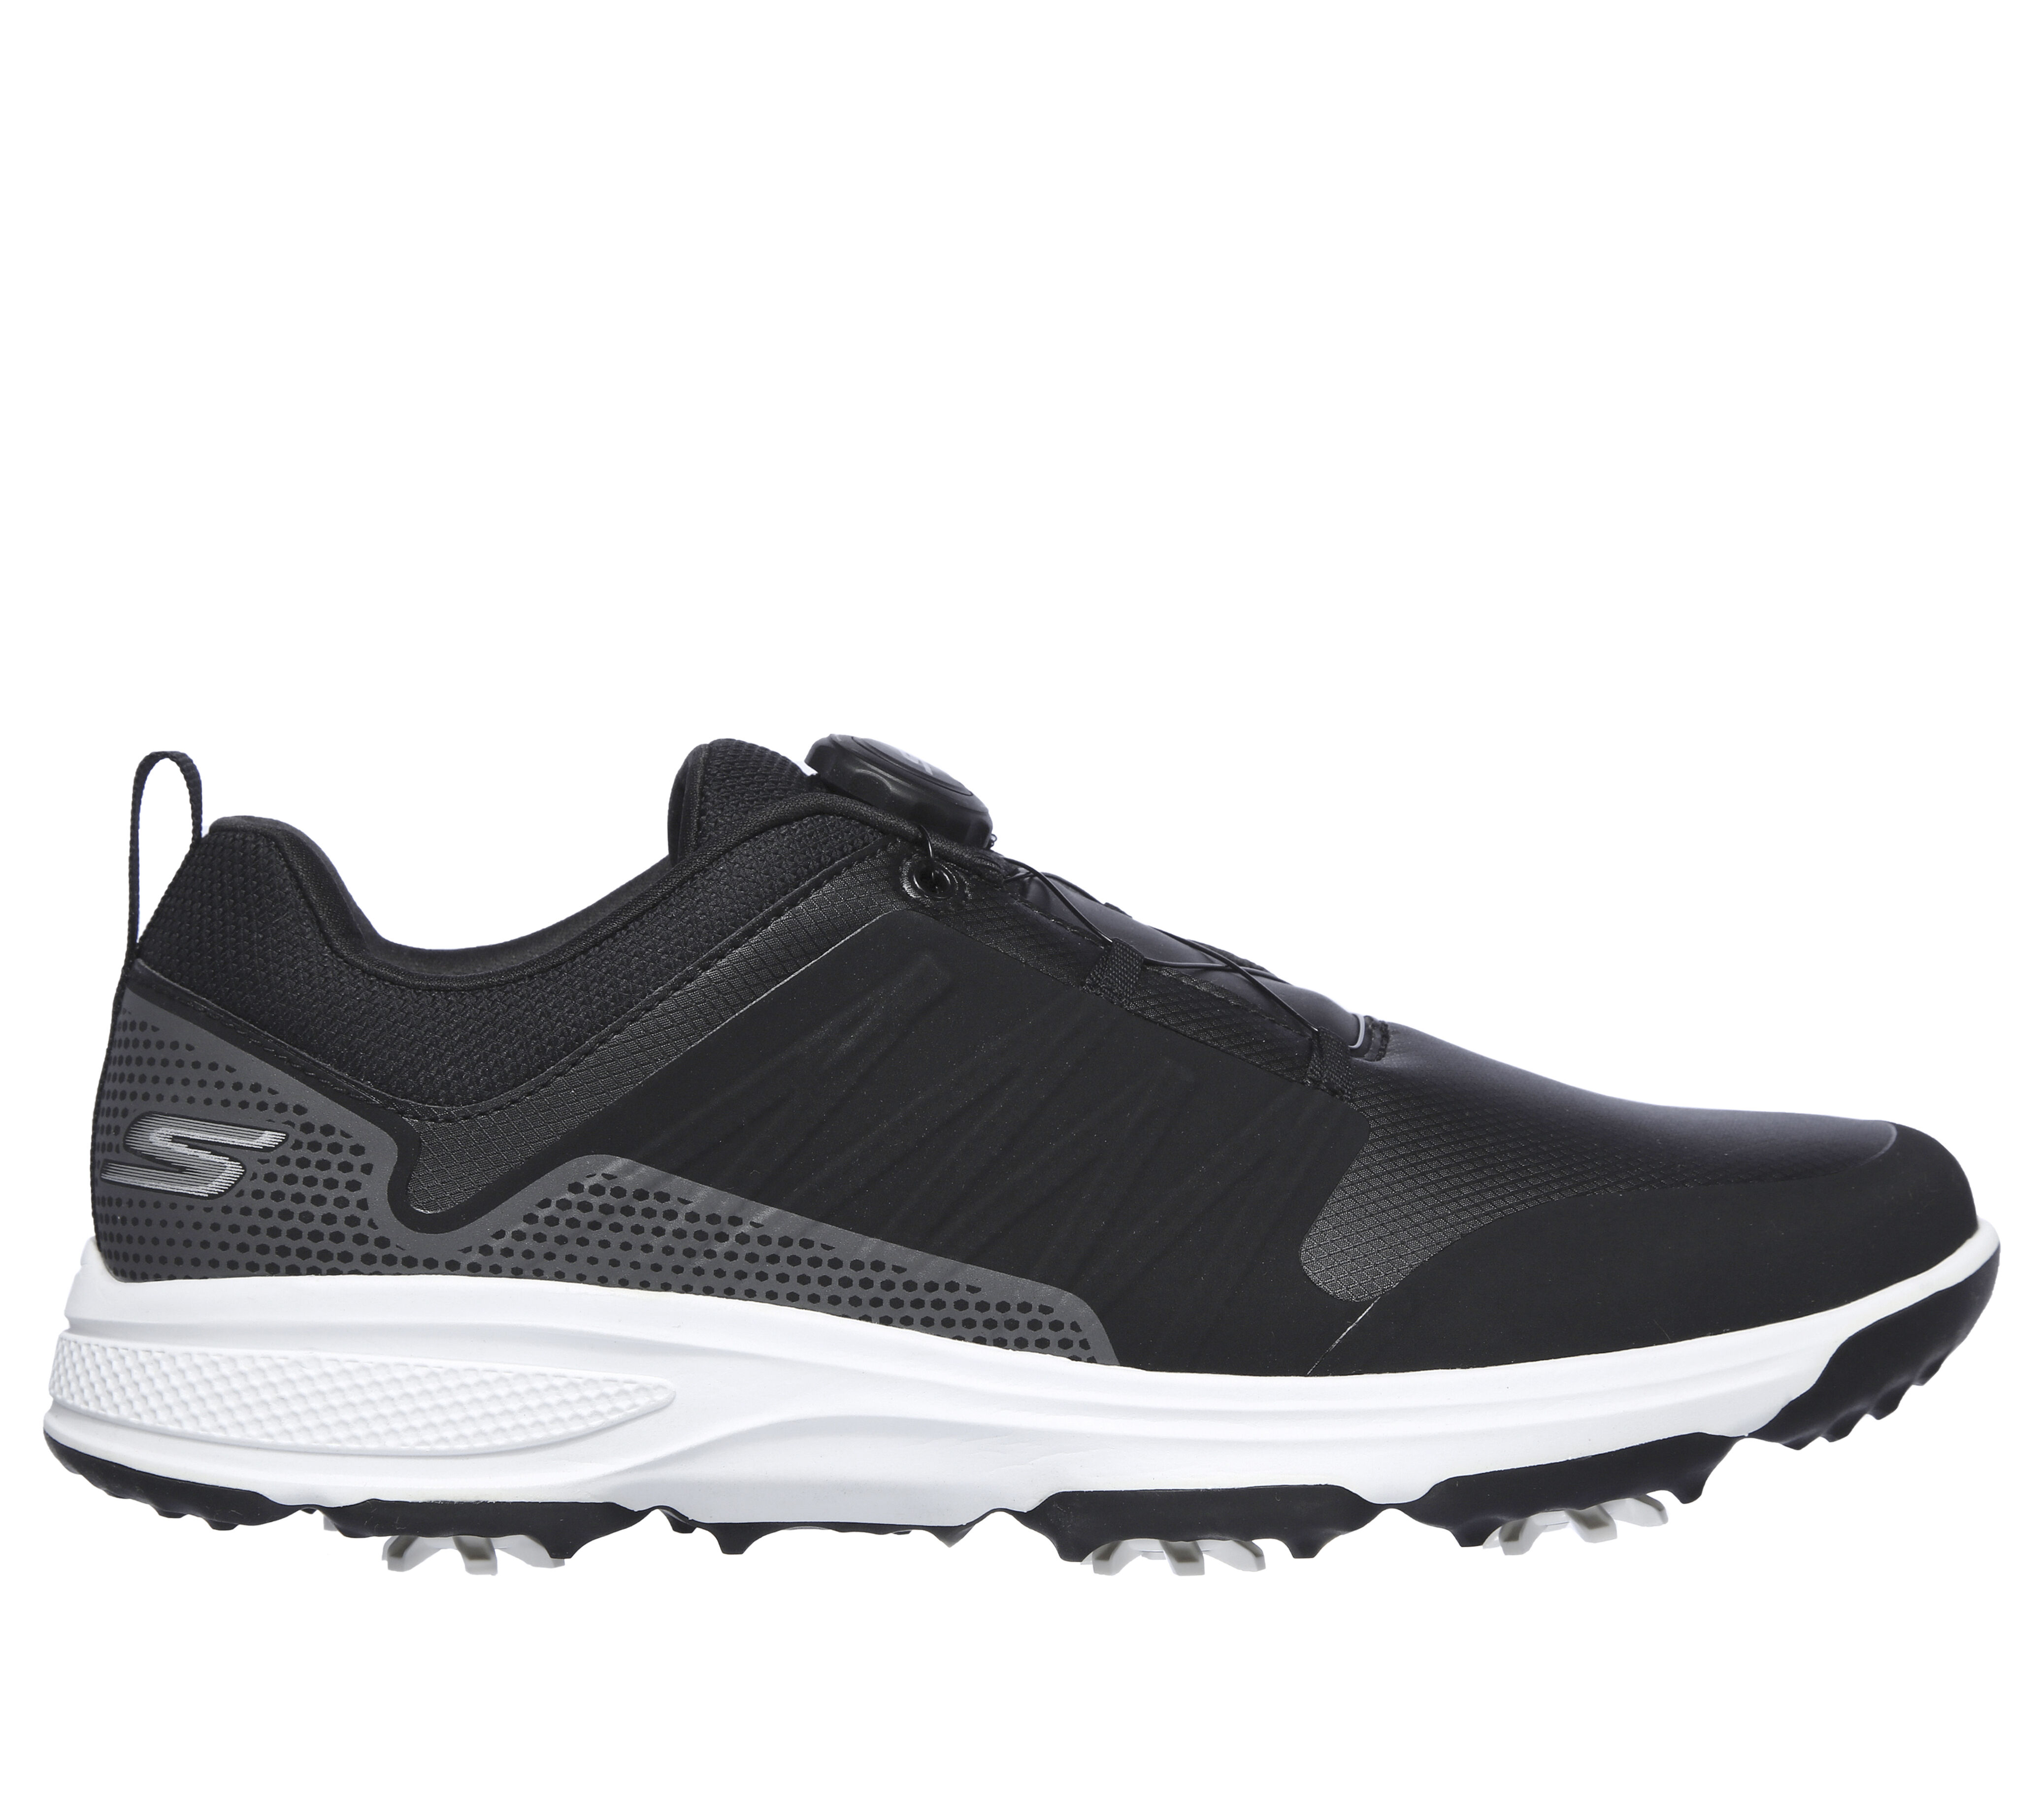 skechers golf shoes clearance